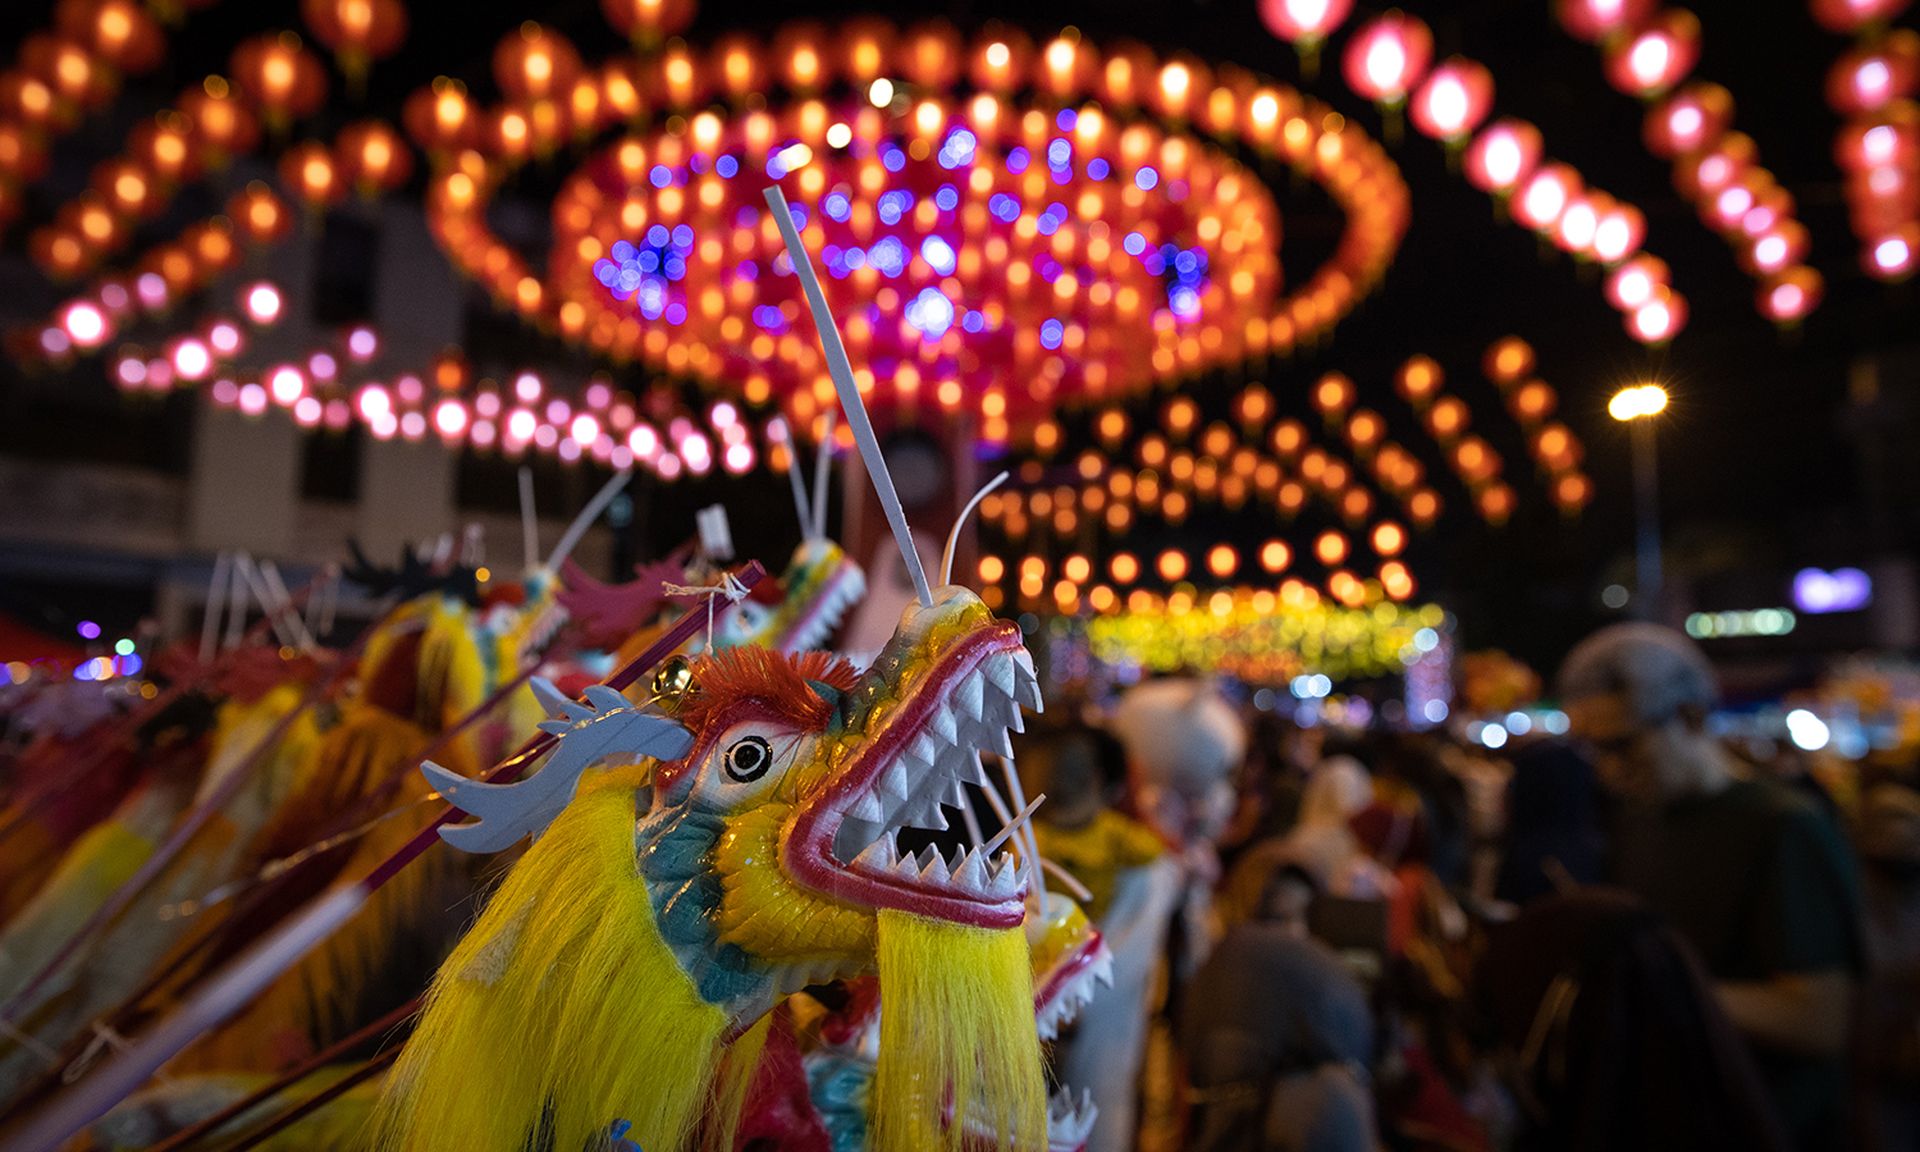 A toy Chinese dragon is seen at a festival